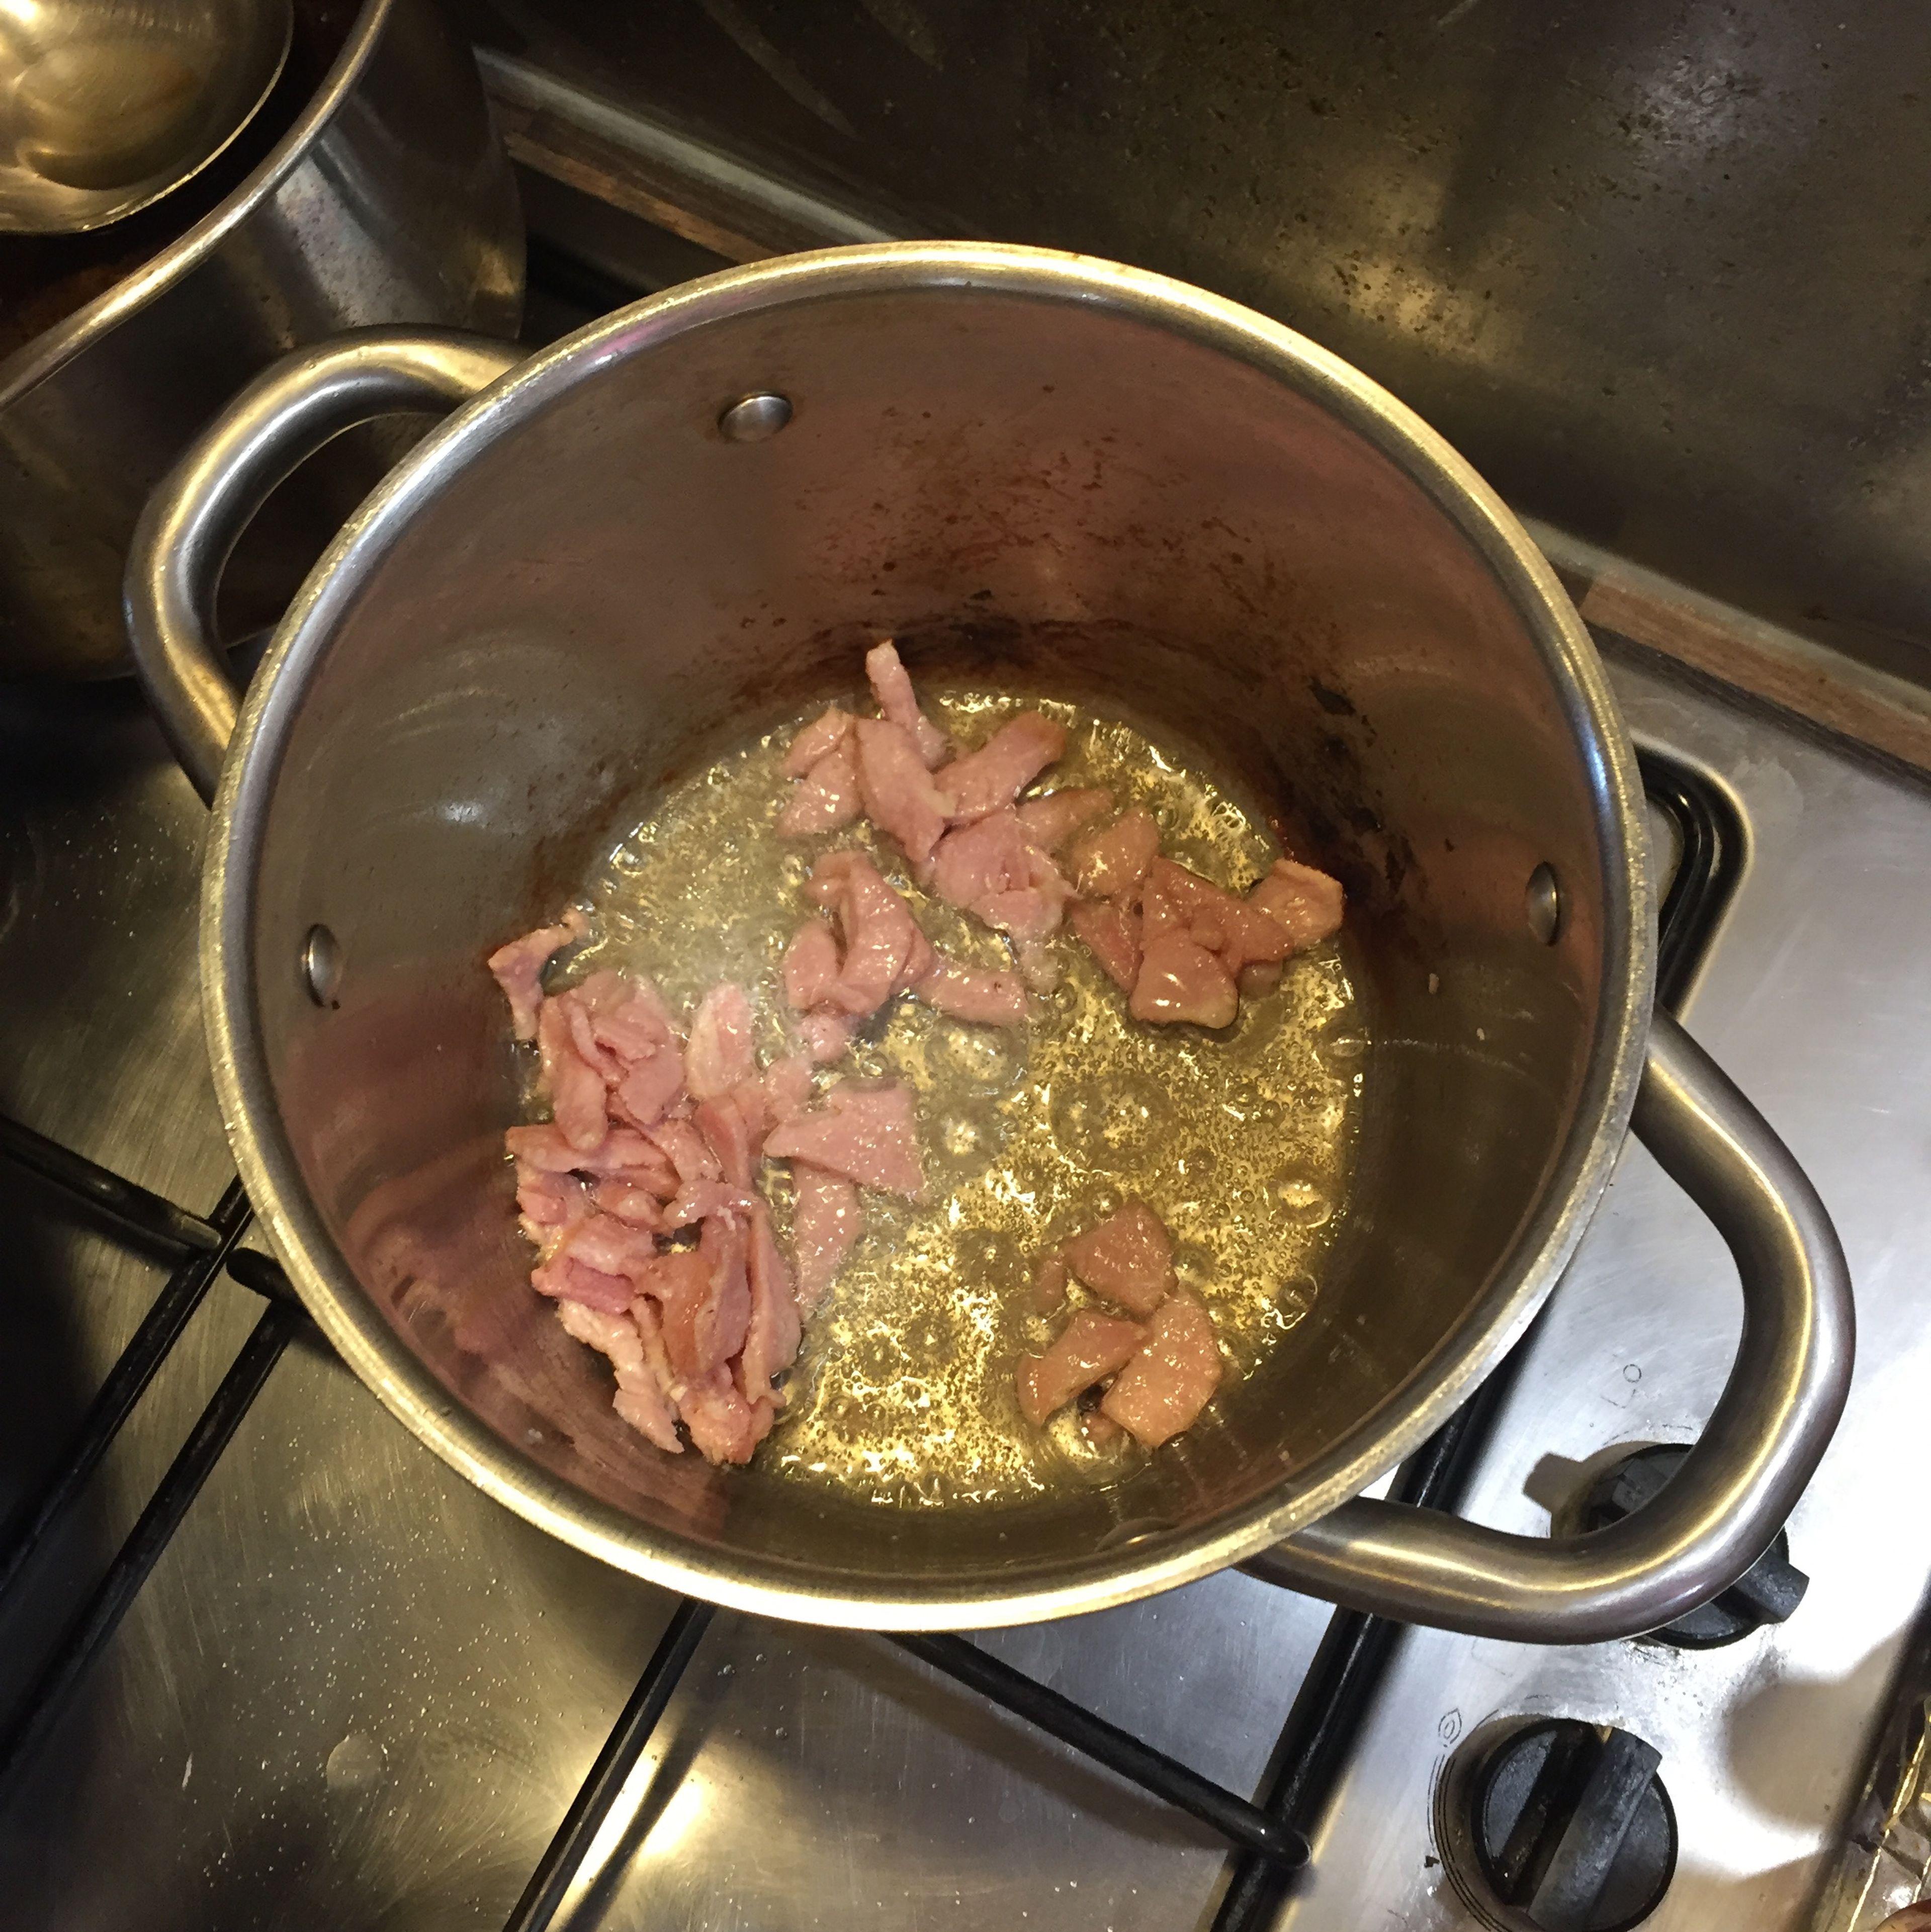 add the oil. Once it’s hot, add the bacon and fry till it’s cooked and brown. Remove the bacon